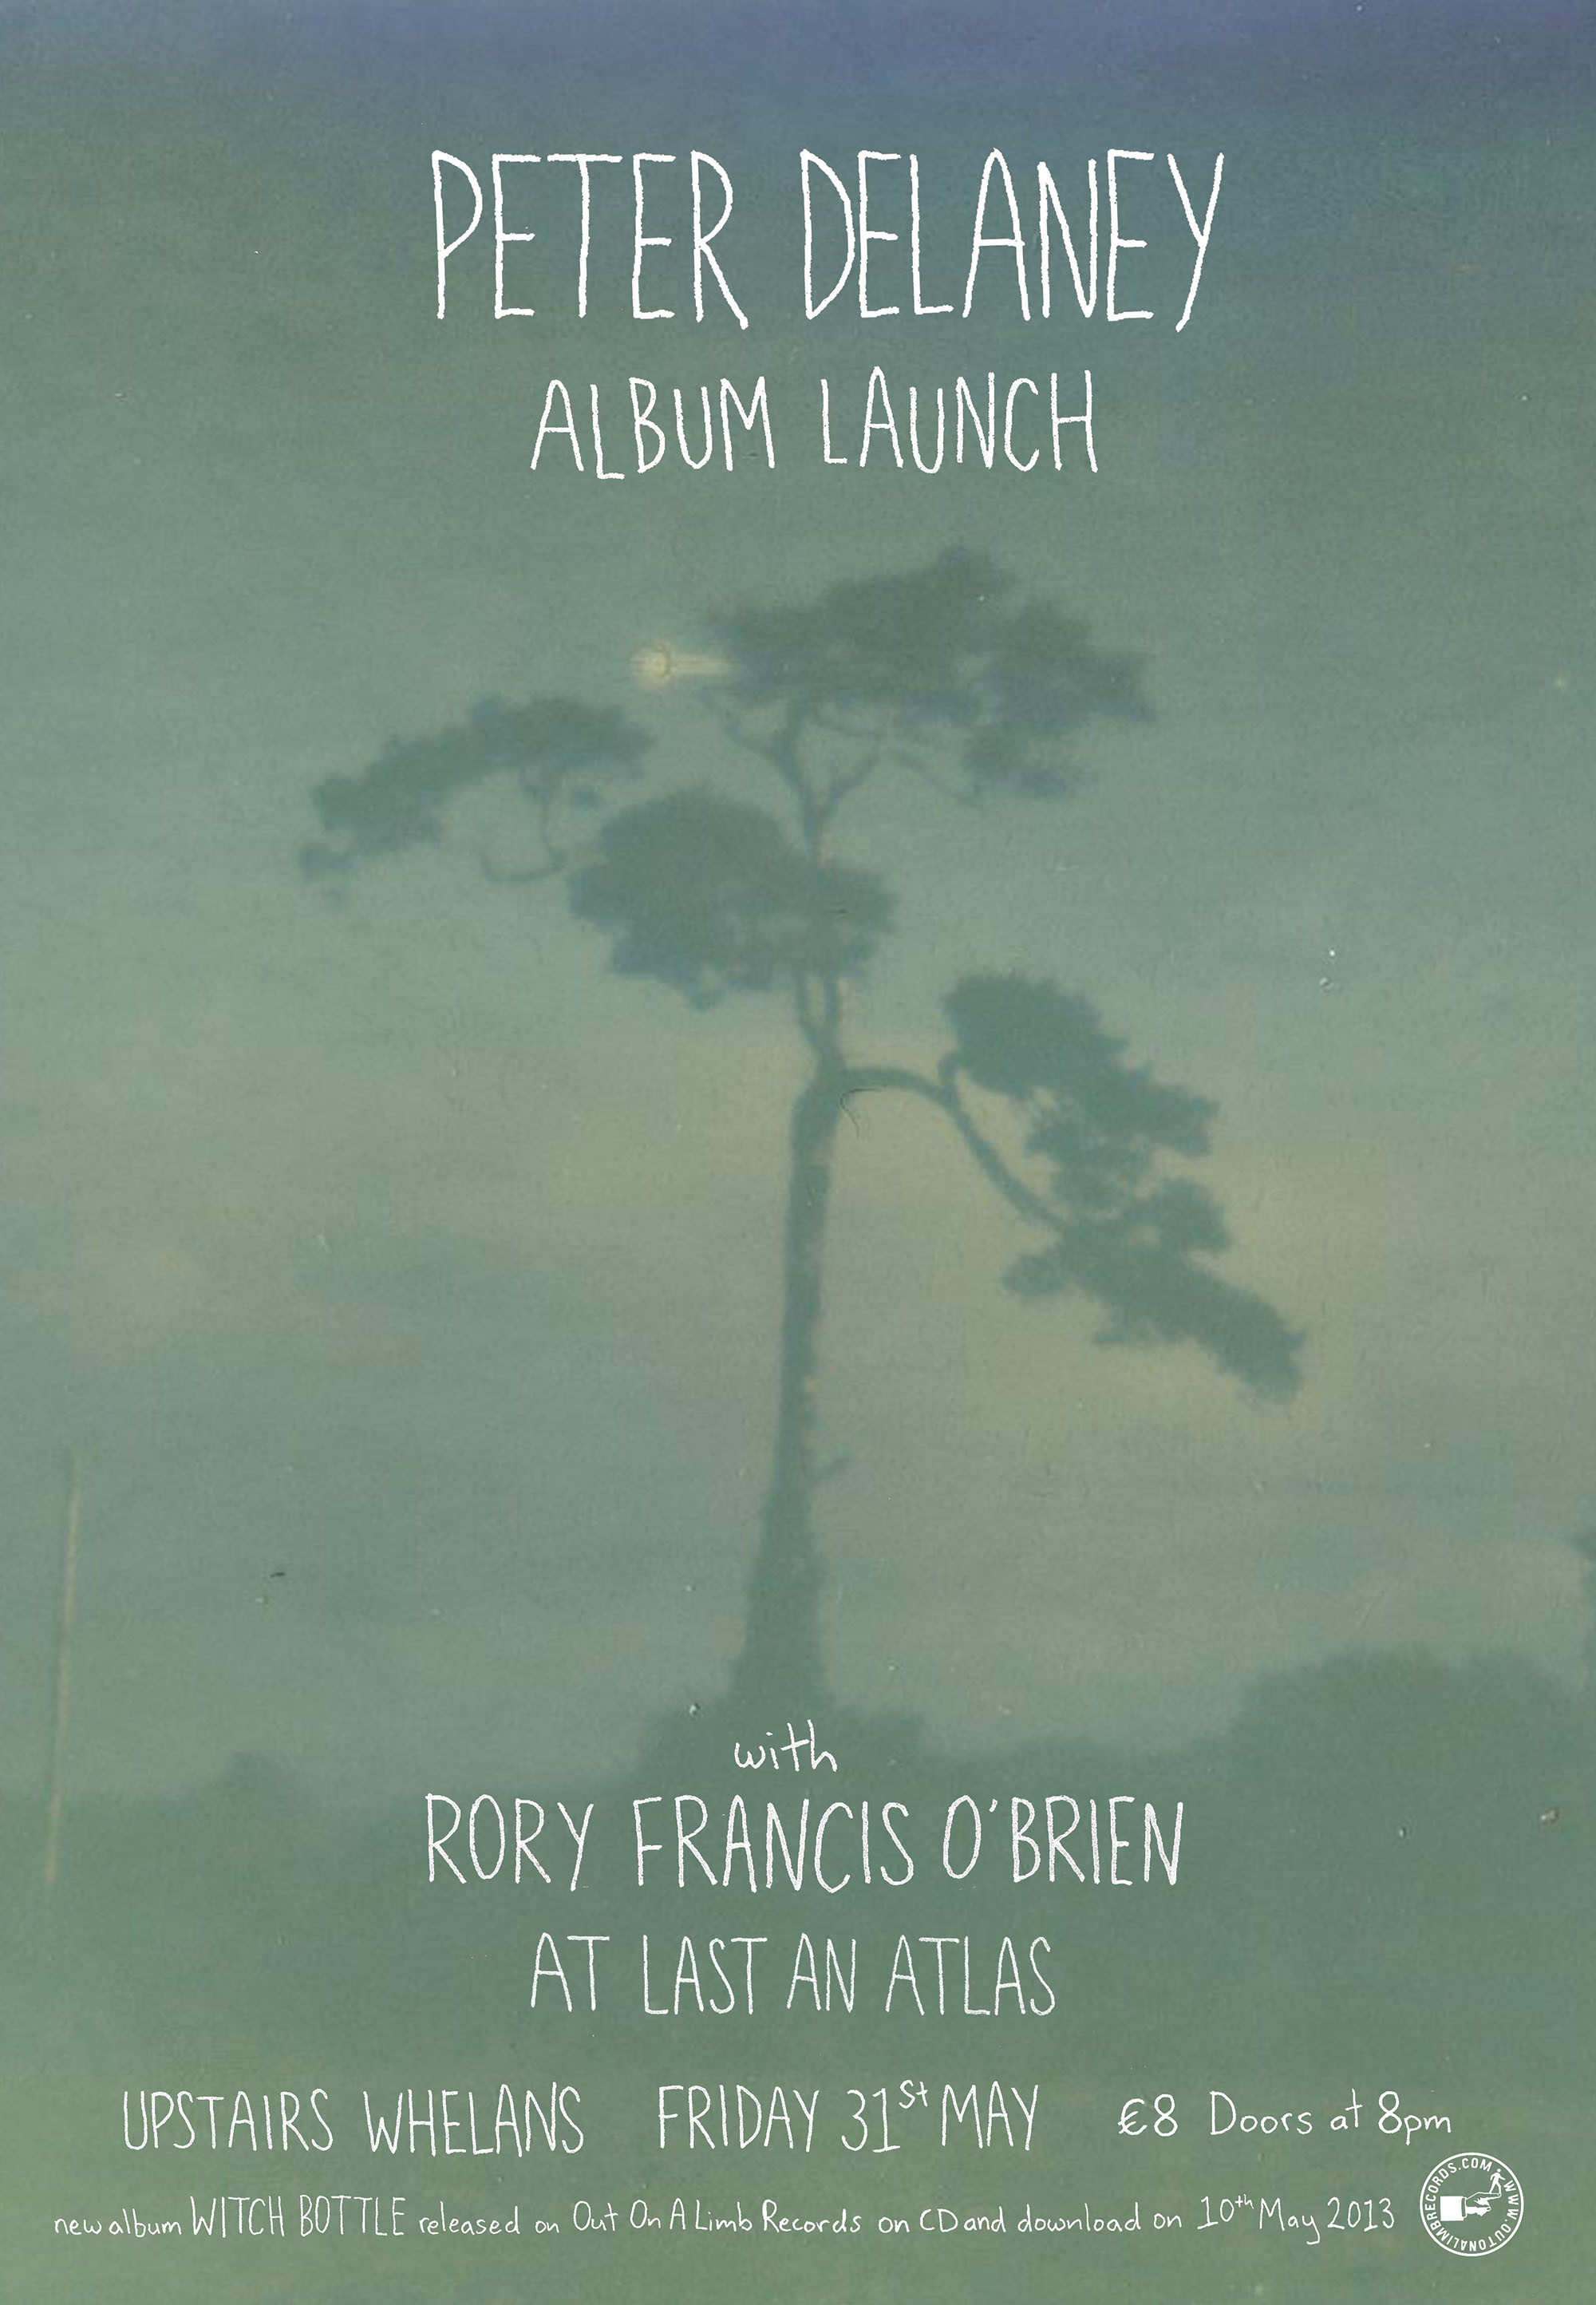 Poster for the launch of the album.